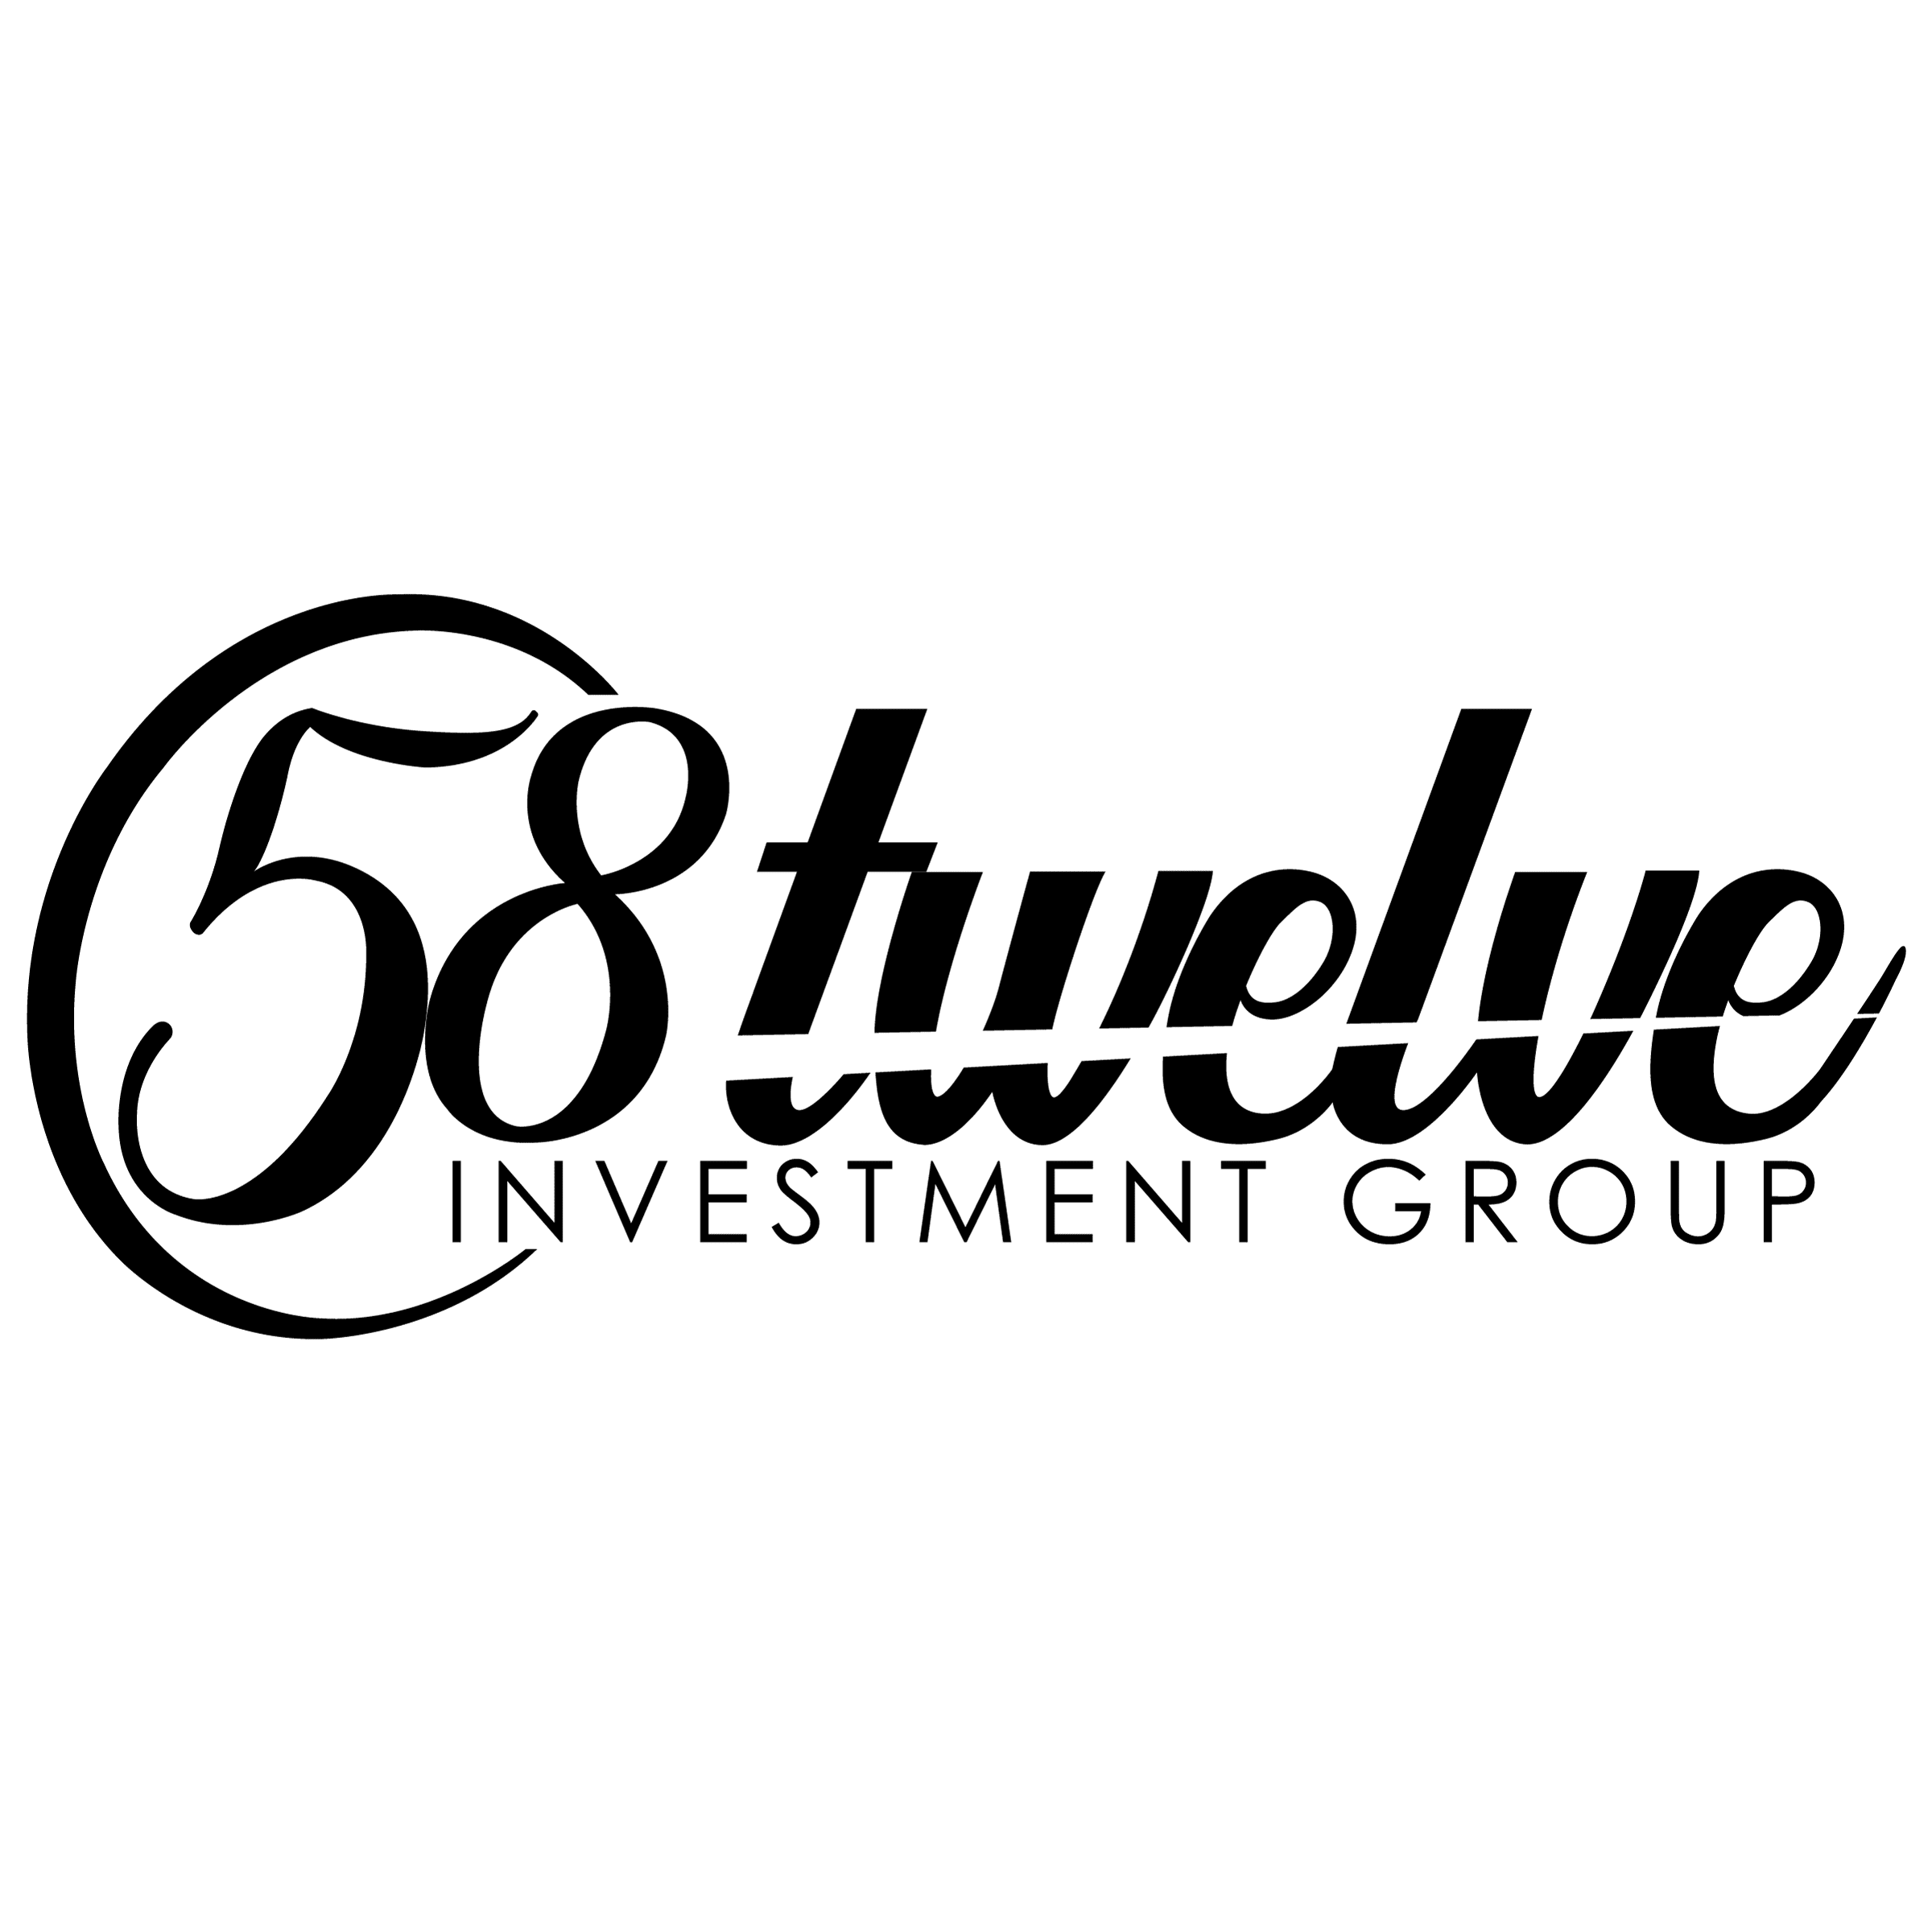 5812 Investment Group 